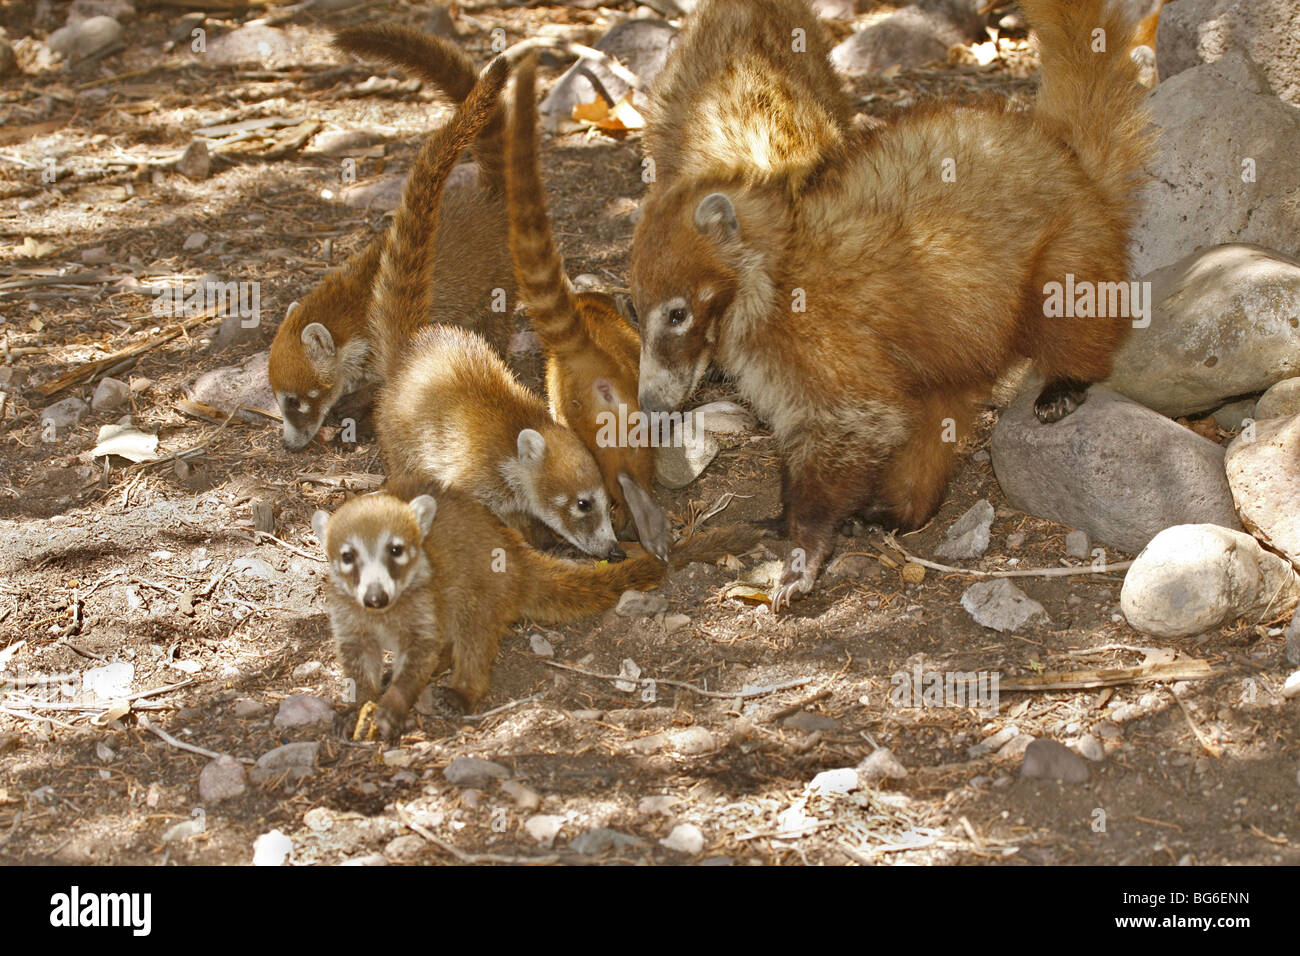 Baby coatis forage with their mother in shade of trees in the Chiracahua Mountains of Arizona. Stock Photo